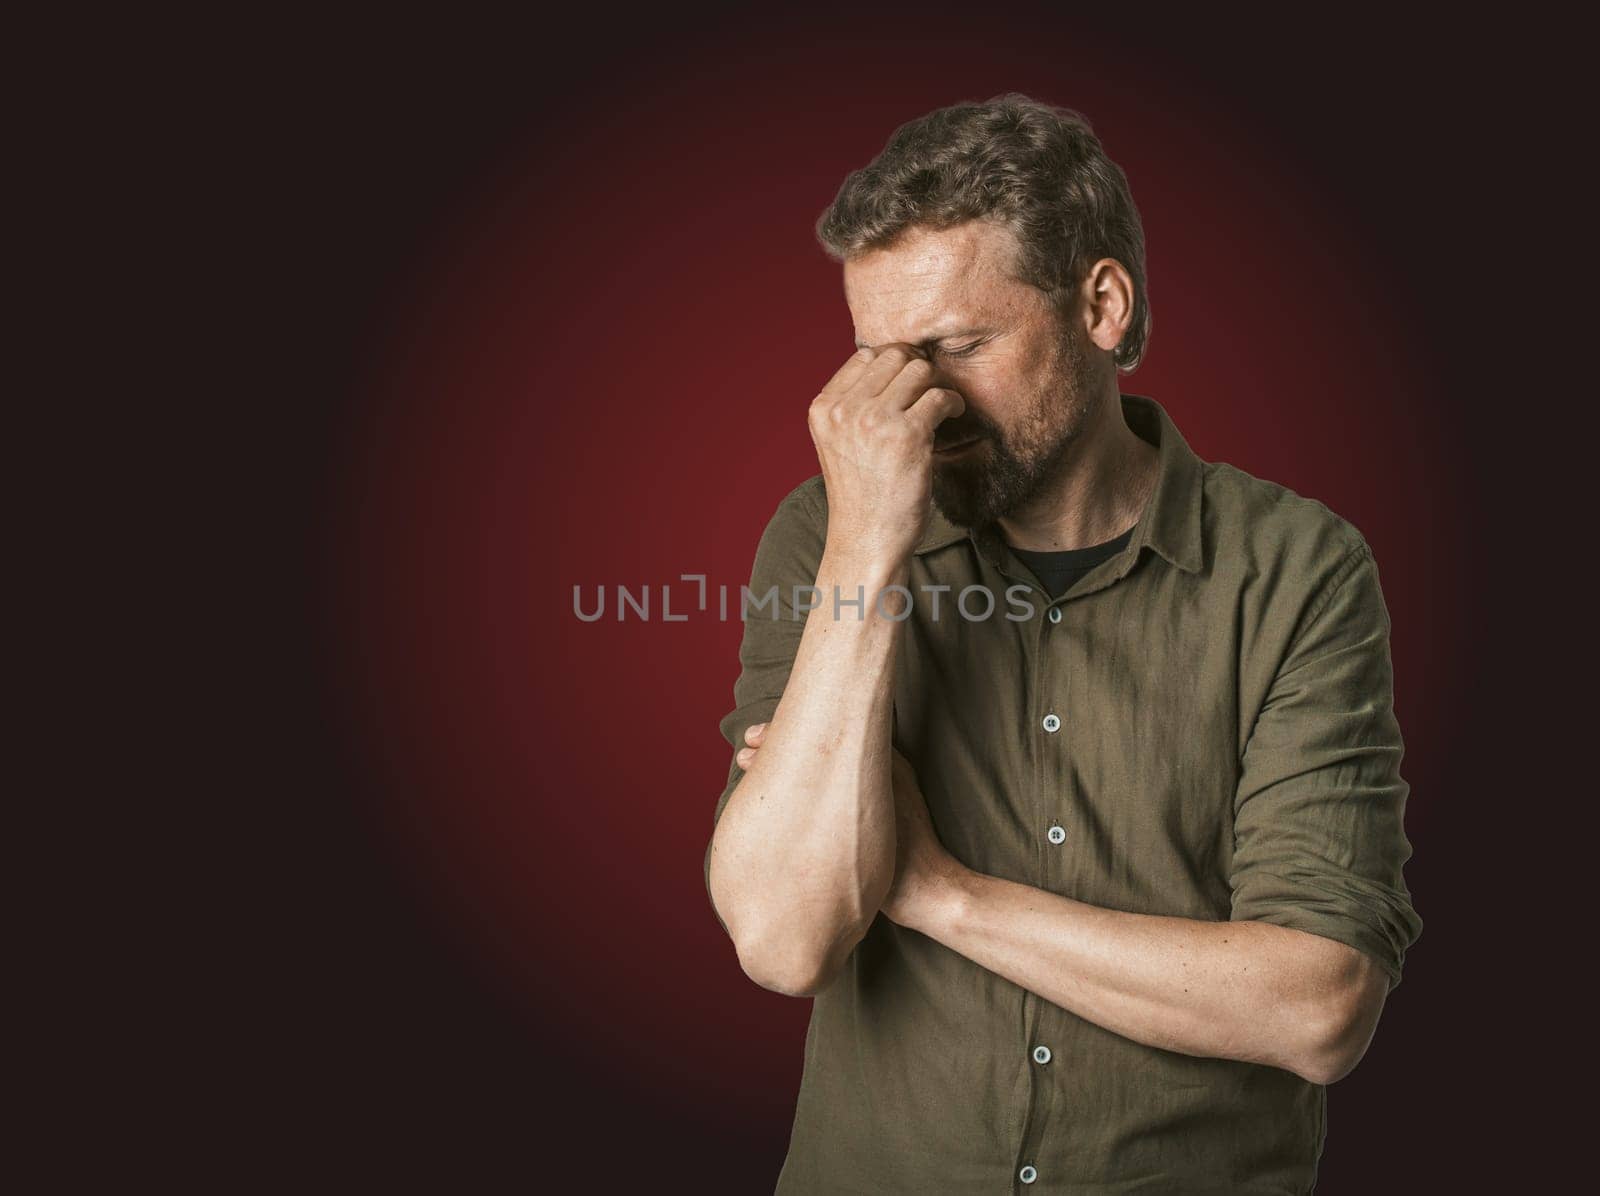 Man facing personal problems and challenges. Mid-aged man with closed eyes, conveying sense of sadness and inner turmoil. Isolated on dark red background, feeling of despair and emotional struggle. by LipikStockMedia